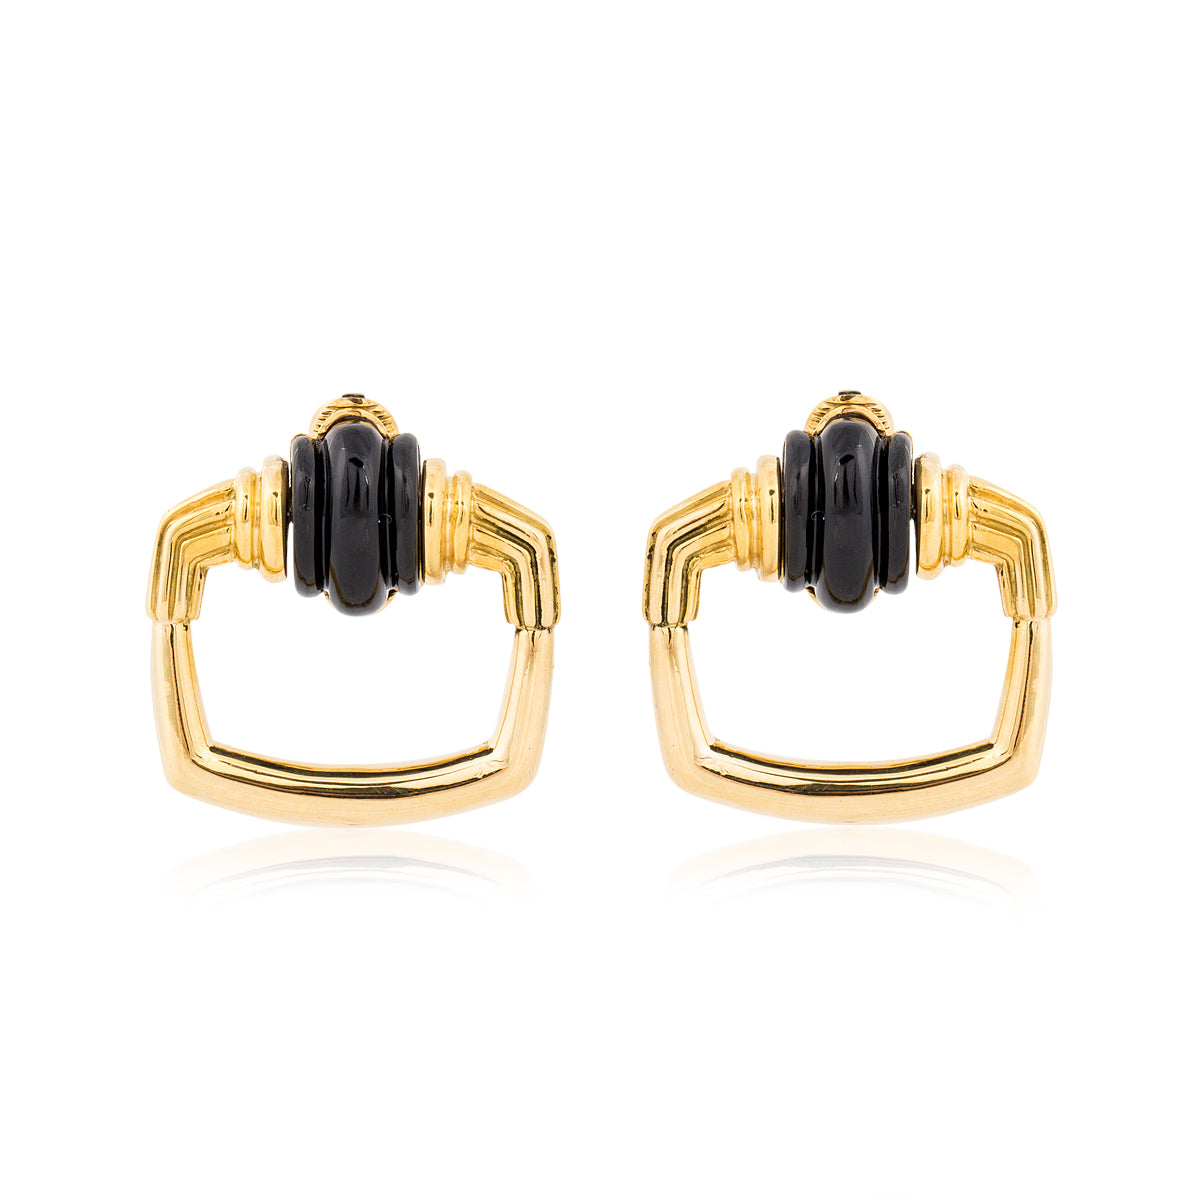 Cartier 18K Gold and Onyx Earrings by Aldo Cipullo